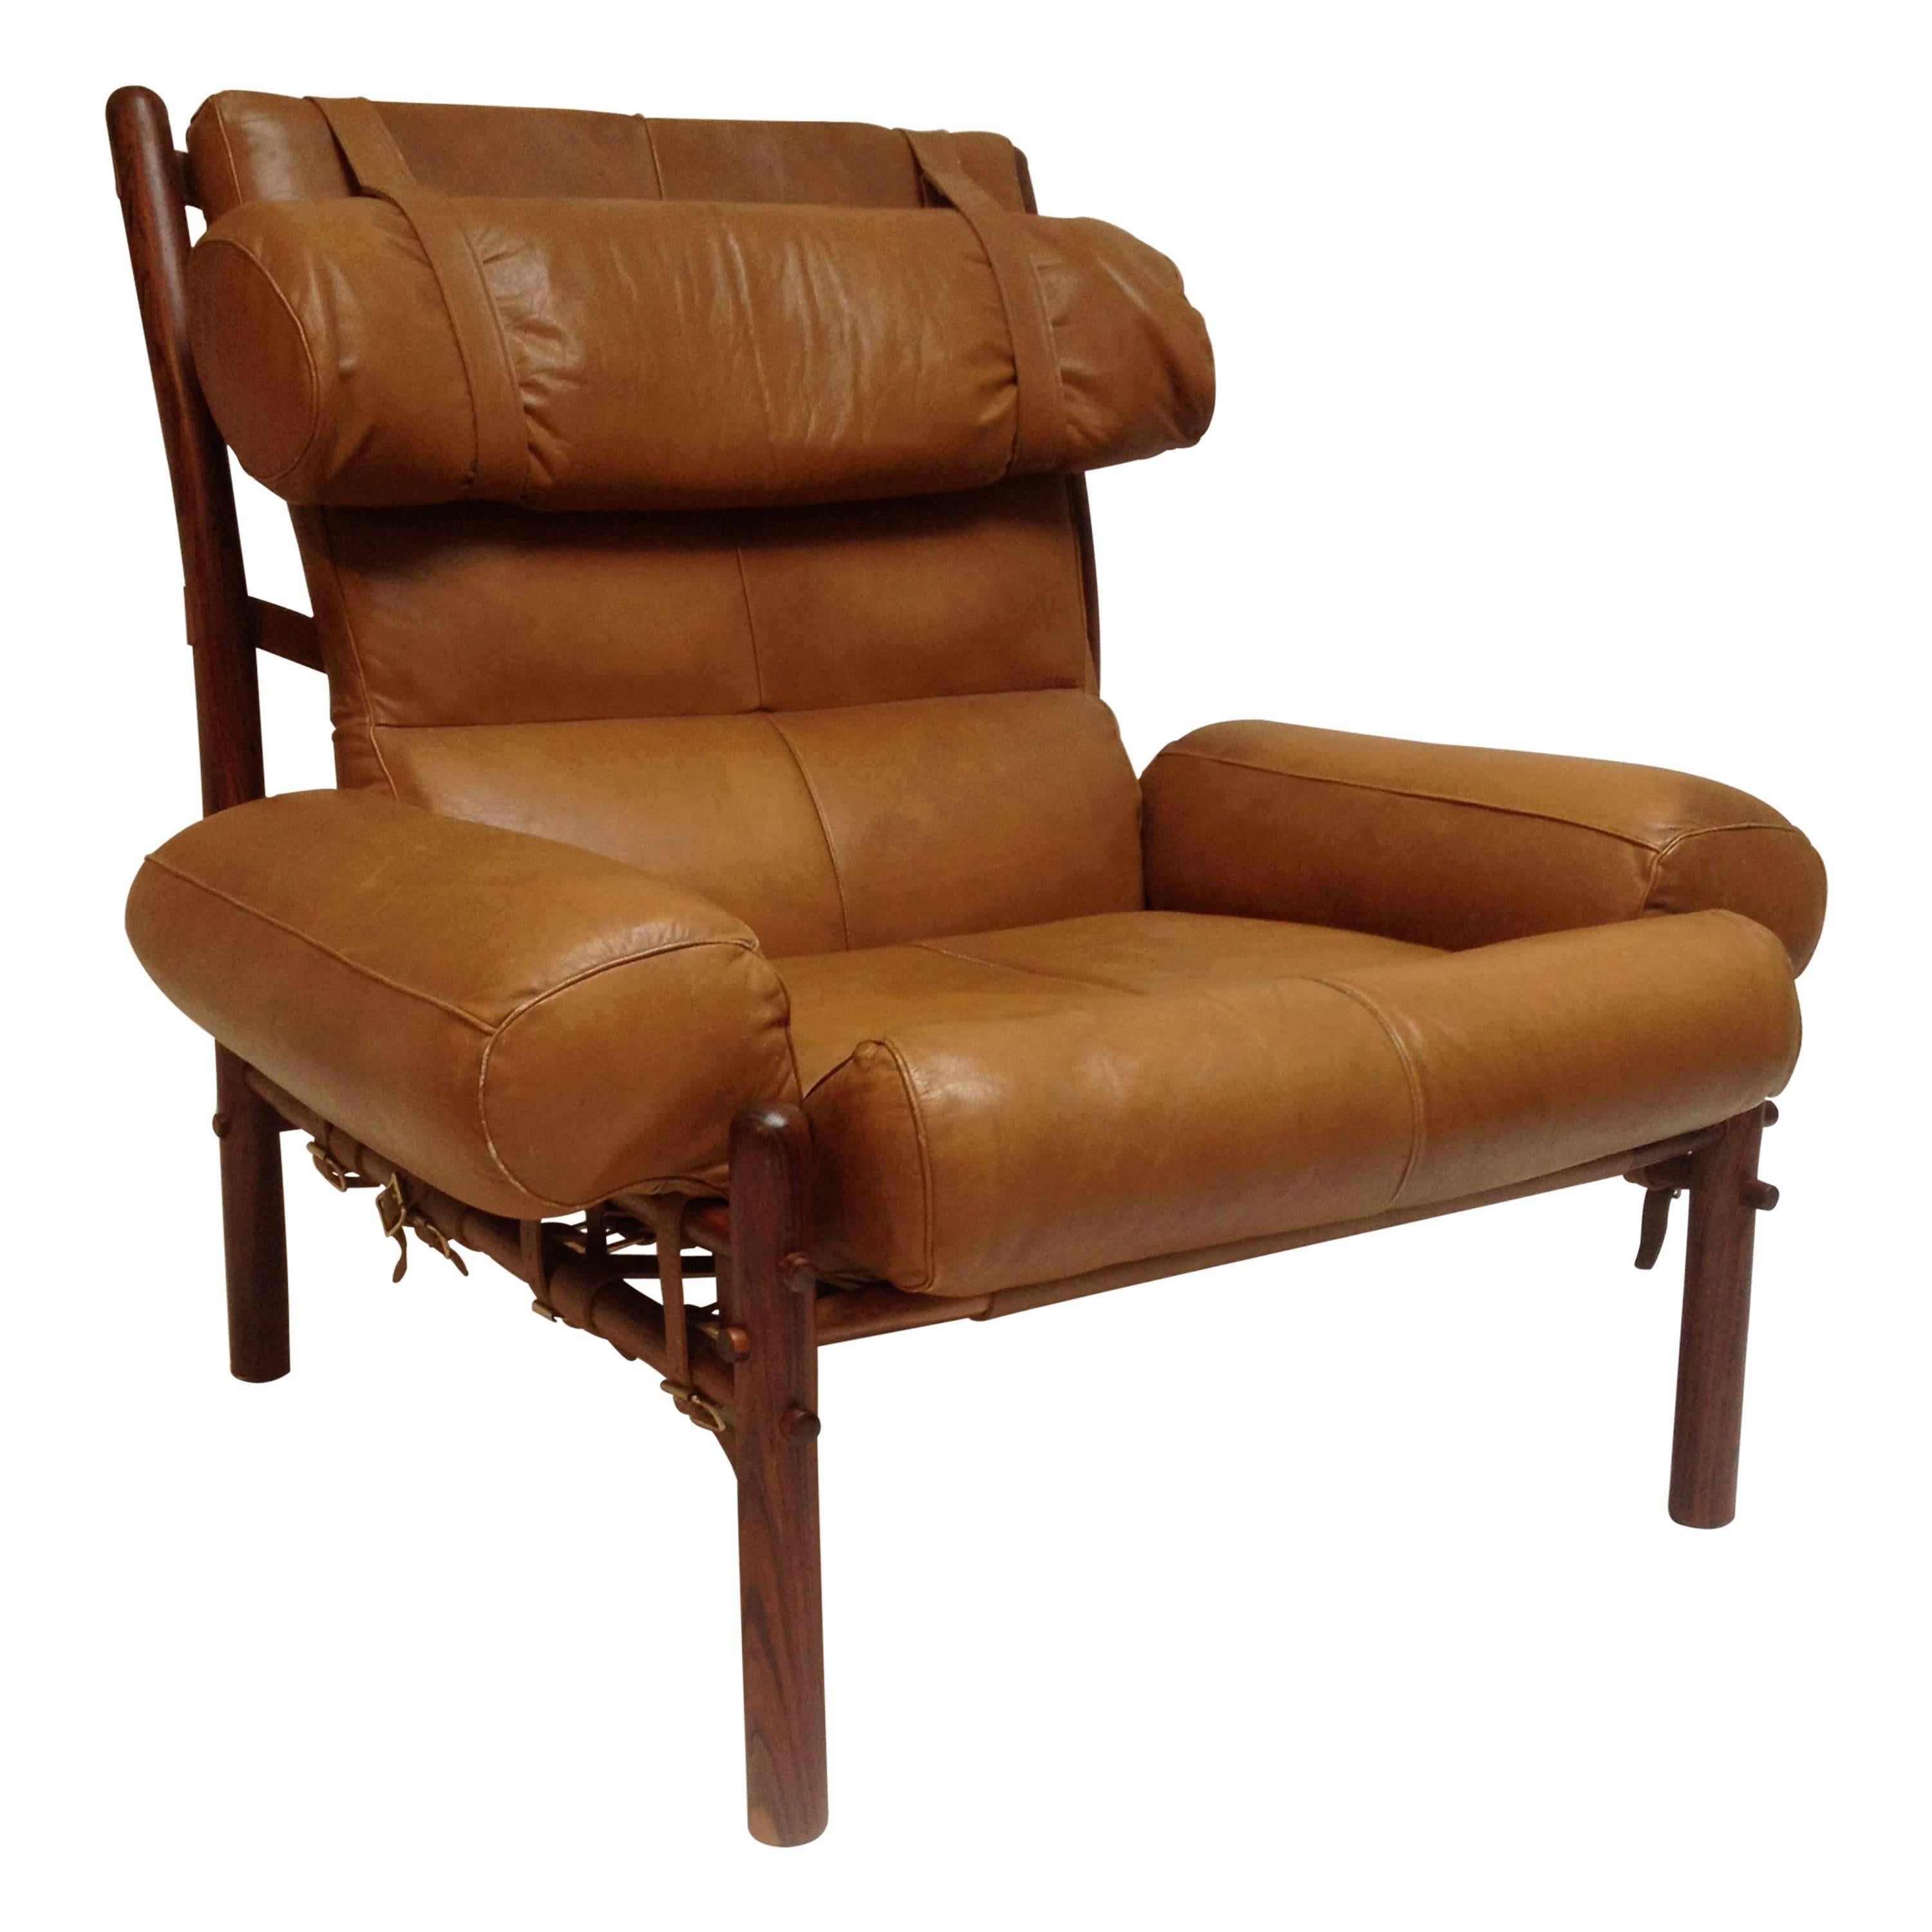 Arne Norell "Inca" Rosewood and Leather Lounge Chair